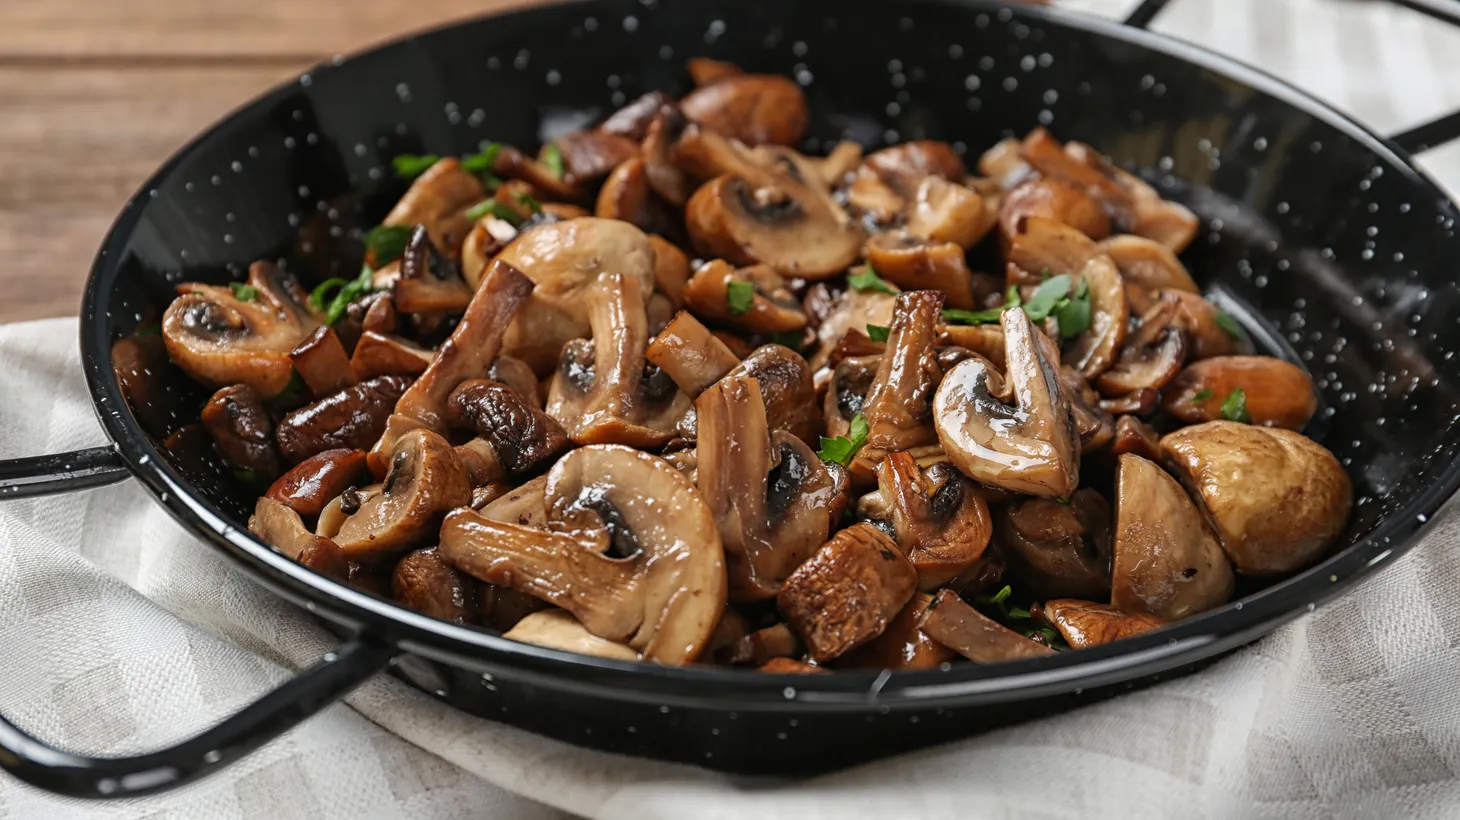 Funghi trifolati, or mushrooms sauteed with garlic and herbs, are endlessly versatile.